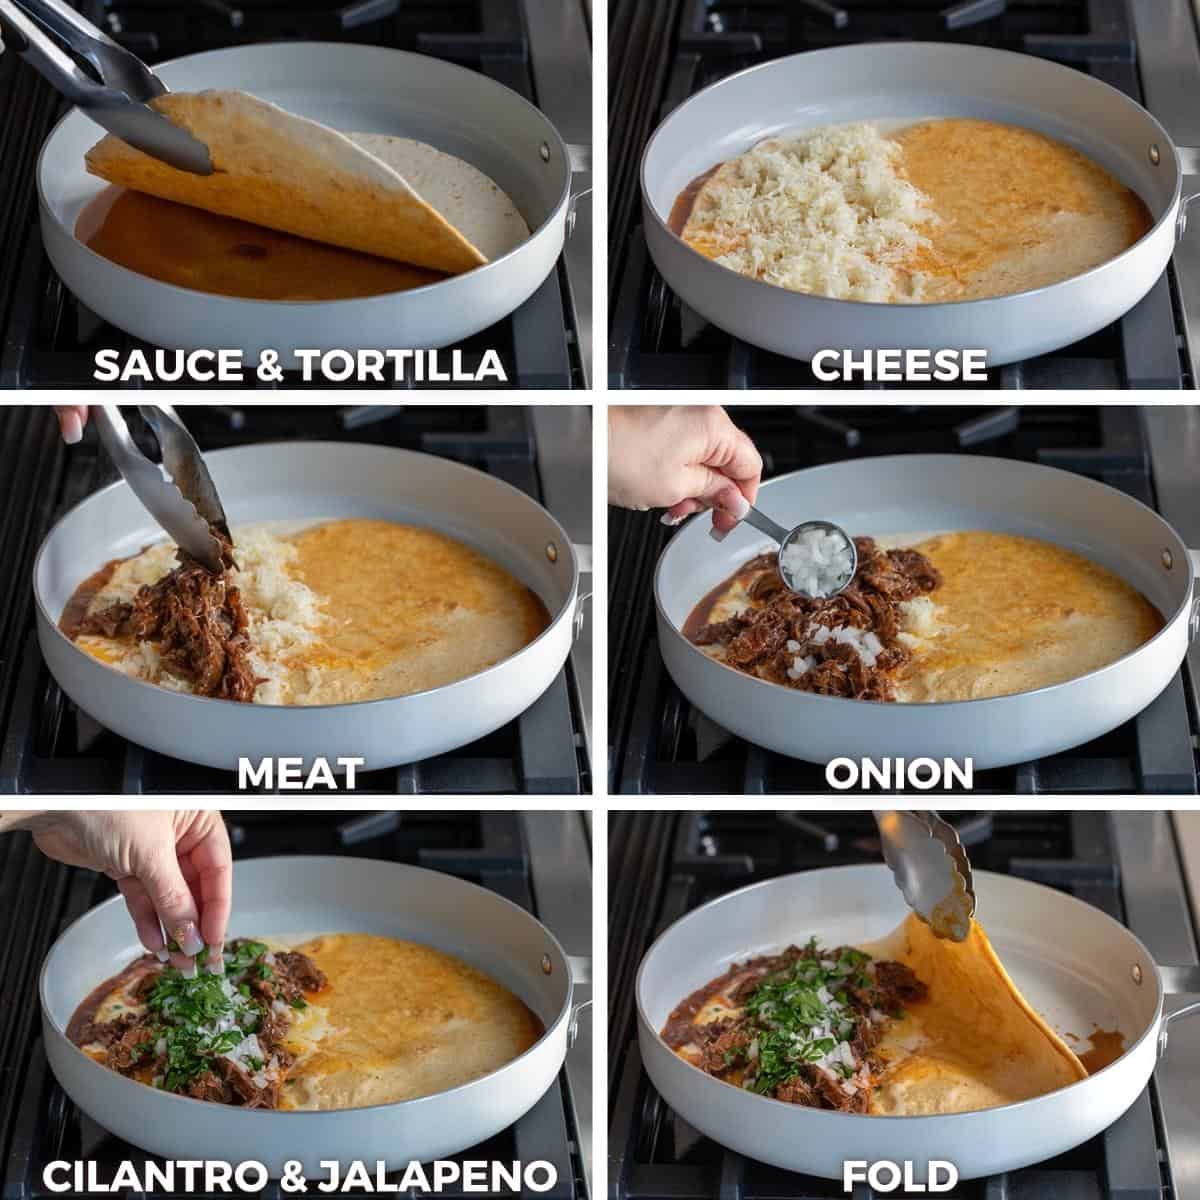 Steps for Making a Birria Quesadilla in a Pan, Adding Sauce, Cheese, Meat, Onions, Cilantro, Jalapeon, and then Folding Quesadilla.